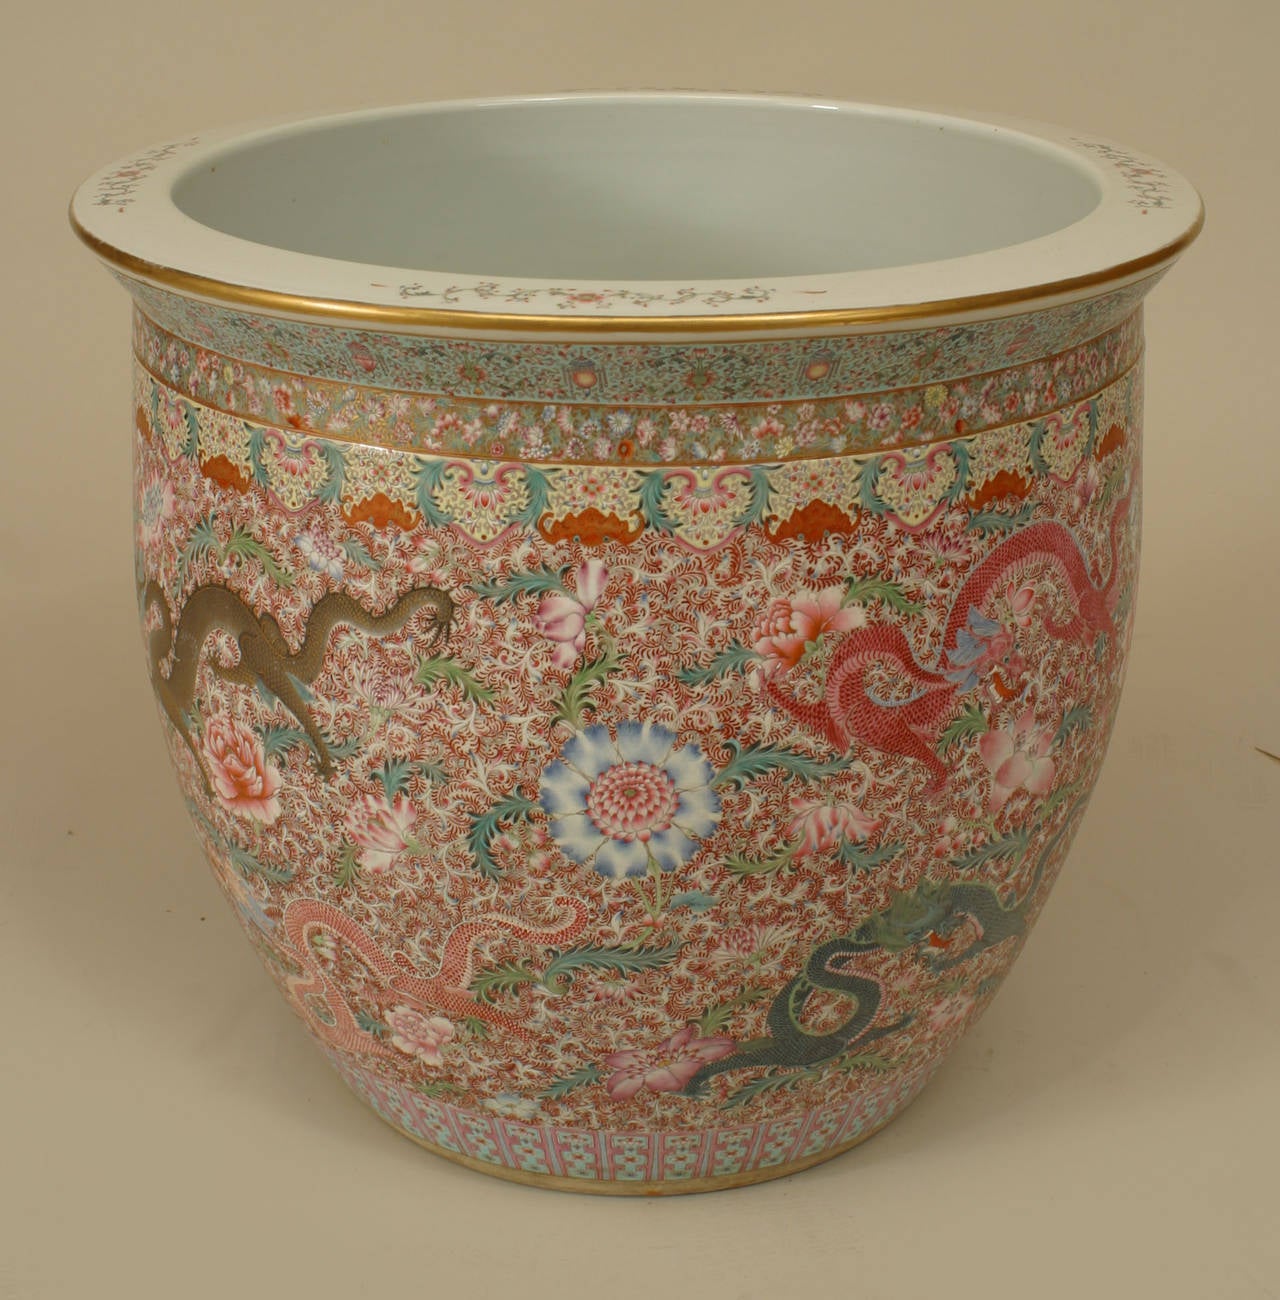 20th century Chinese Rose Medallion style jardiniere with a floral and gilt dragon design.